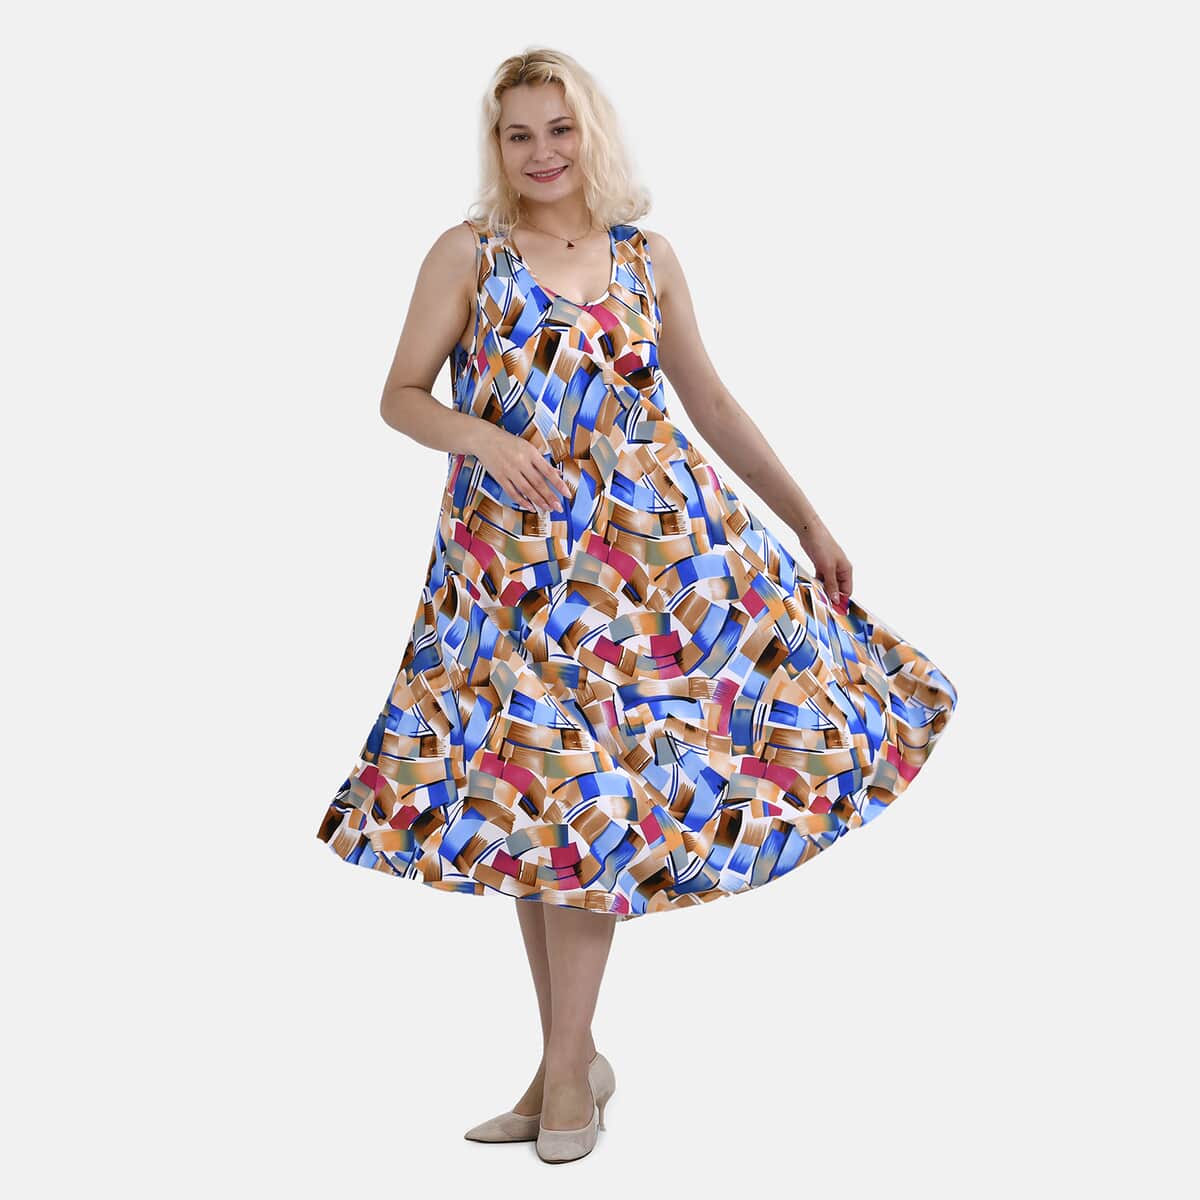 Tamsy Blue Art A-Line Sleeveless Dress - One Size Missy image number 0